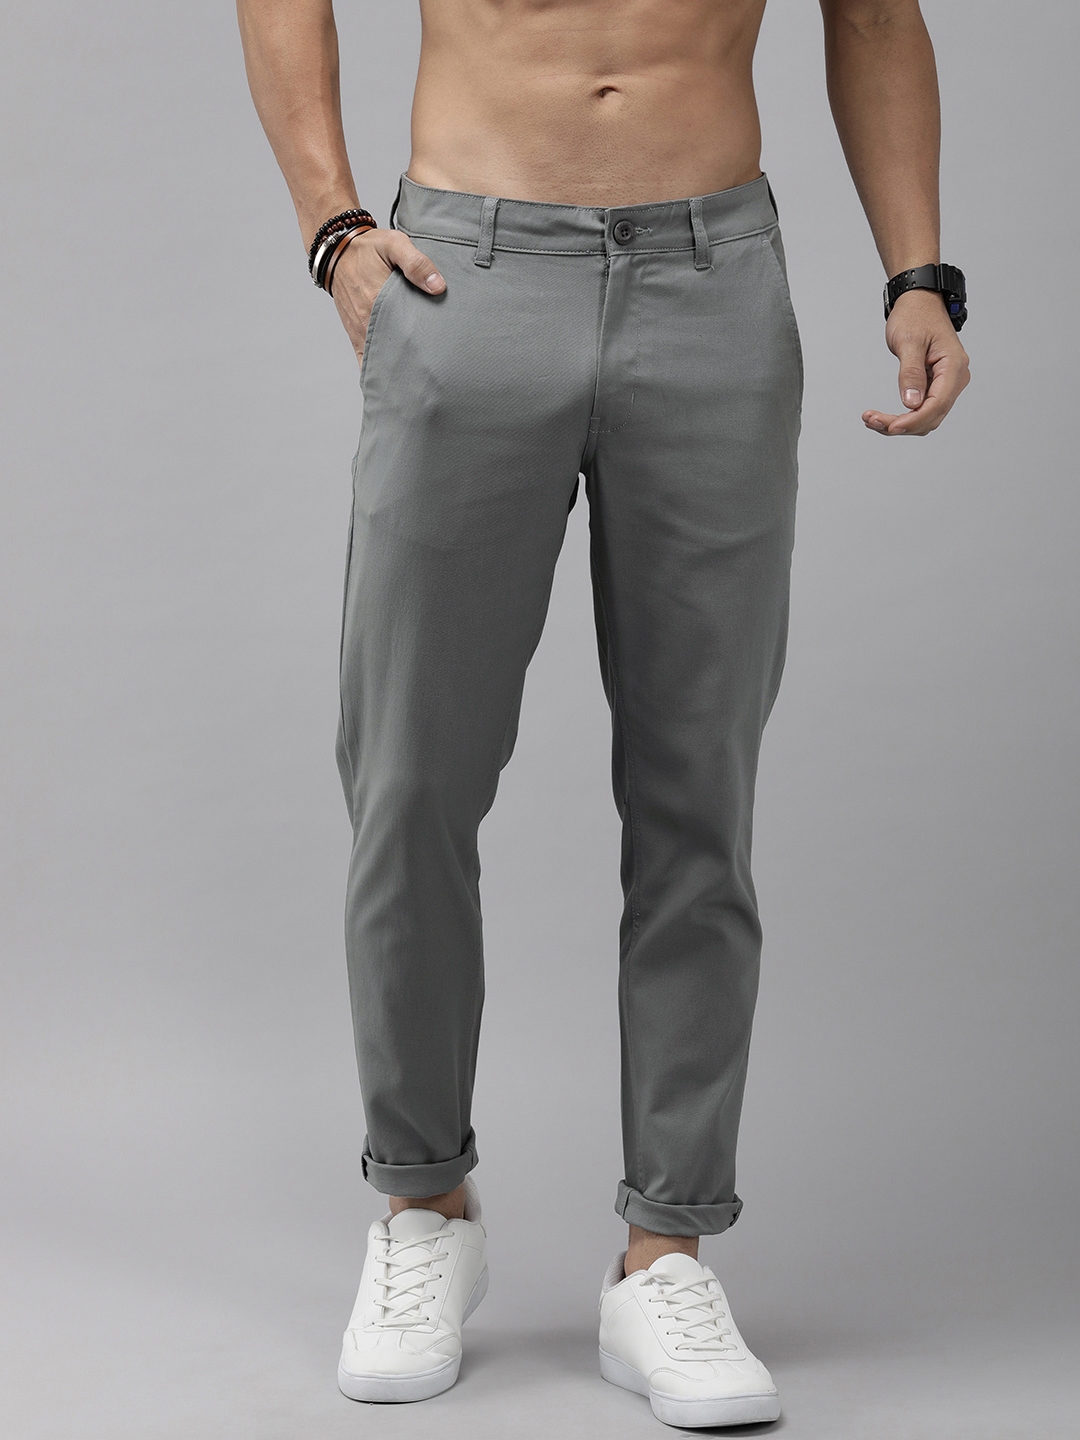 Buy Roadster Classic Slim Fit Chinos Trousers - Trousers for Men ...